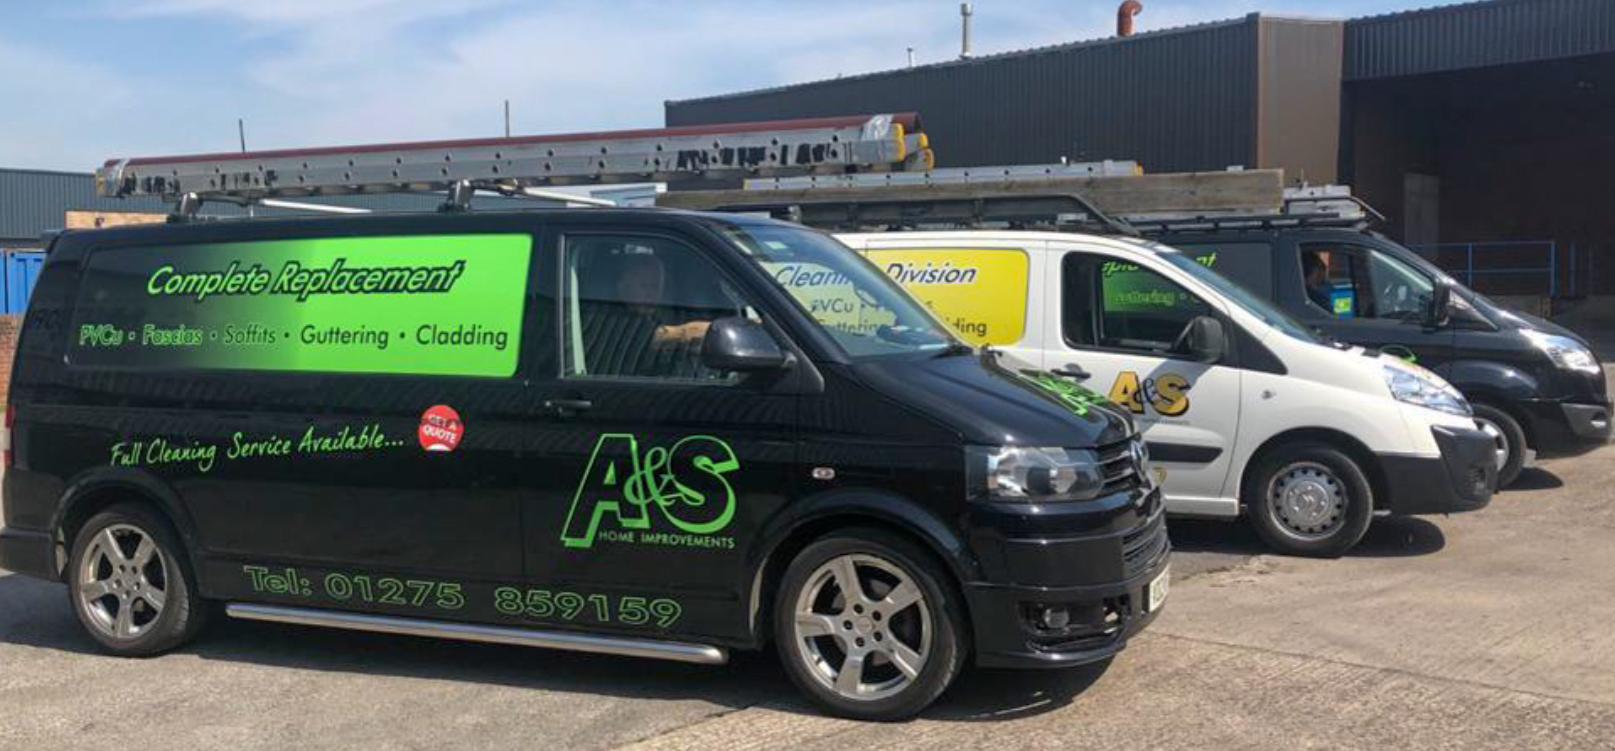 A&S Fasciaboards Cleaning Service